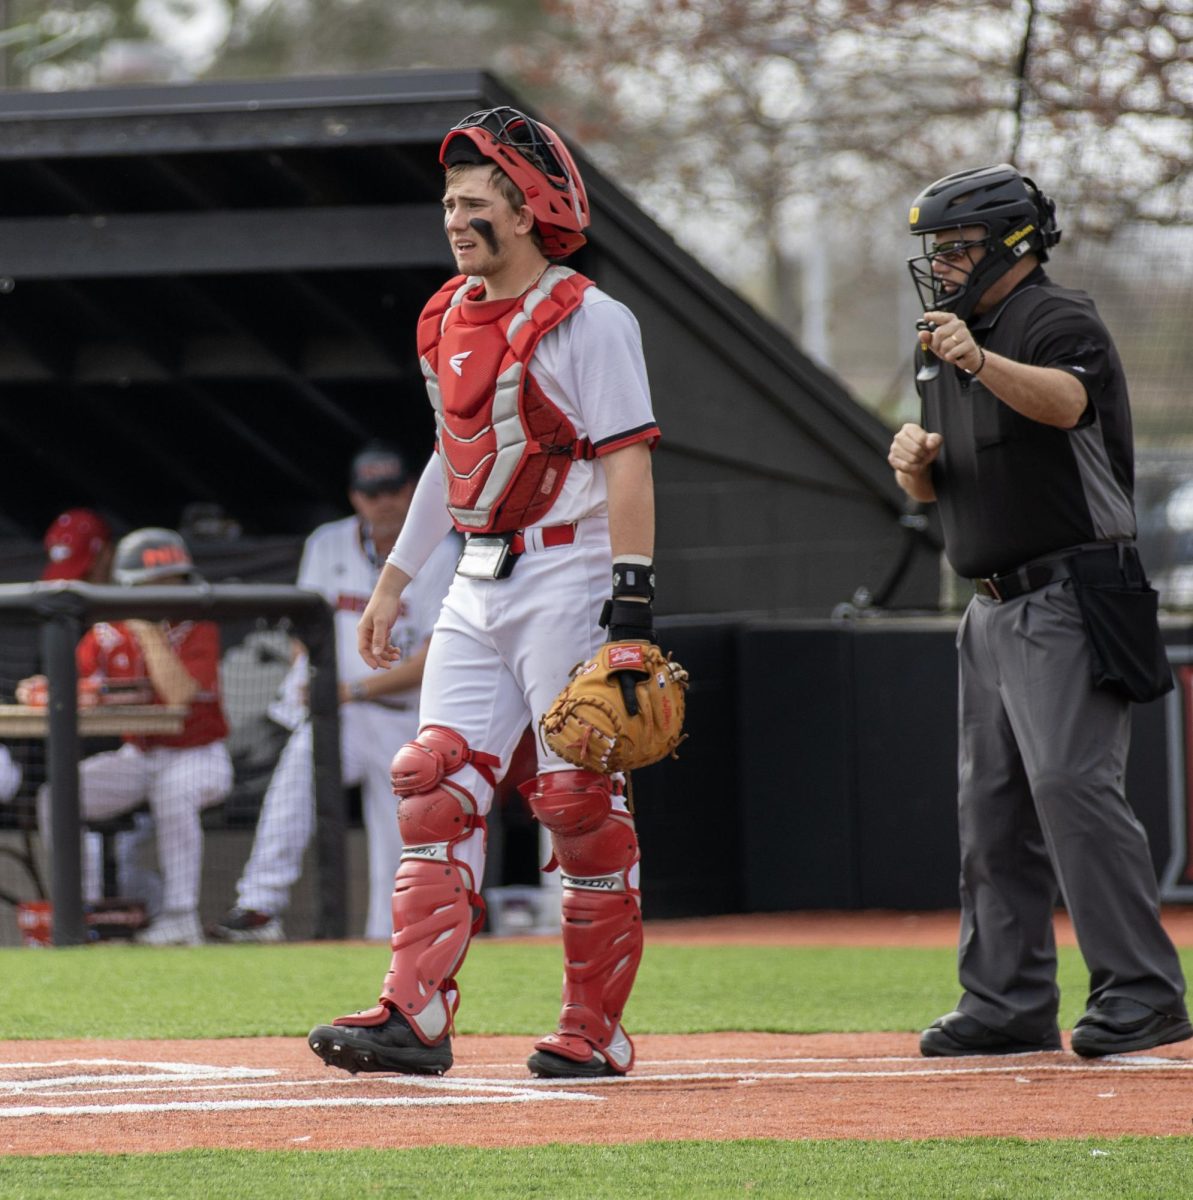 Then-junior+Colin+Summerhill+stands+over+home+plate+in+an+NIU+baseball+home+game+against+Western+Michigan+University+on+April+14%2C+2023.+Summerhill+was+named+to+the+Northern+Star+Sports+Staffs+MAC+baseball+All-Star+squad.+%28Tim+Dodge+%7C+Northern+Star%29